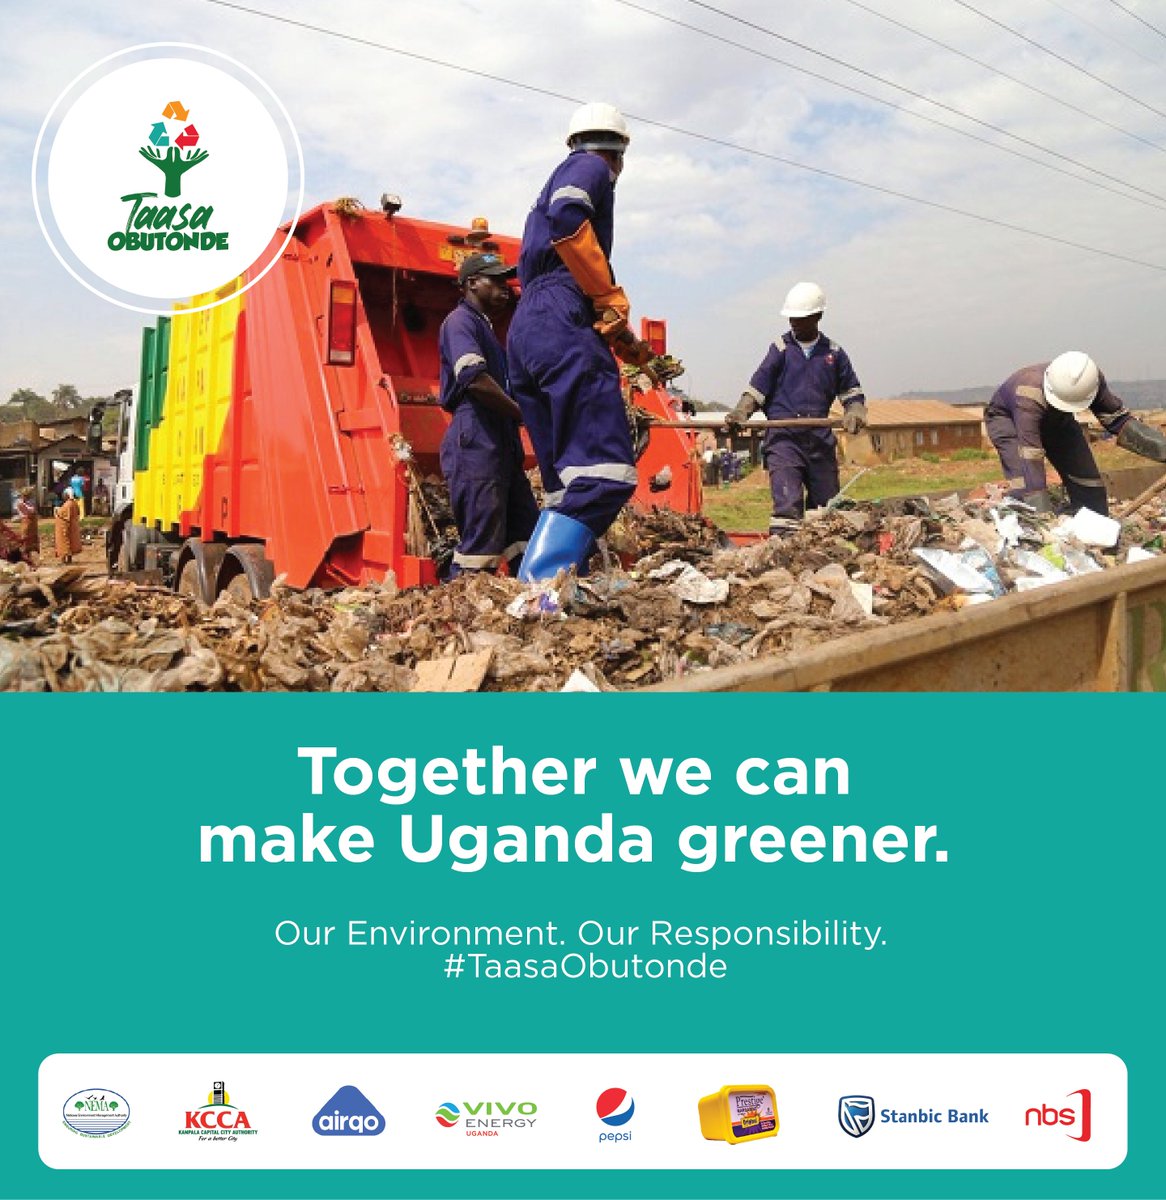 Share your commitment to reducing plastic waste by adopting at least one eco-friendly habit this week. Tag a friend and challenge them to join the movement.~@nemaug @AirQoProject @KCCAUG @VivoEnergyUg @PepsiUganda @stanbicug @nbstv #TaasaObutonde